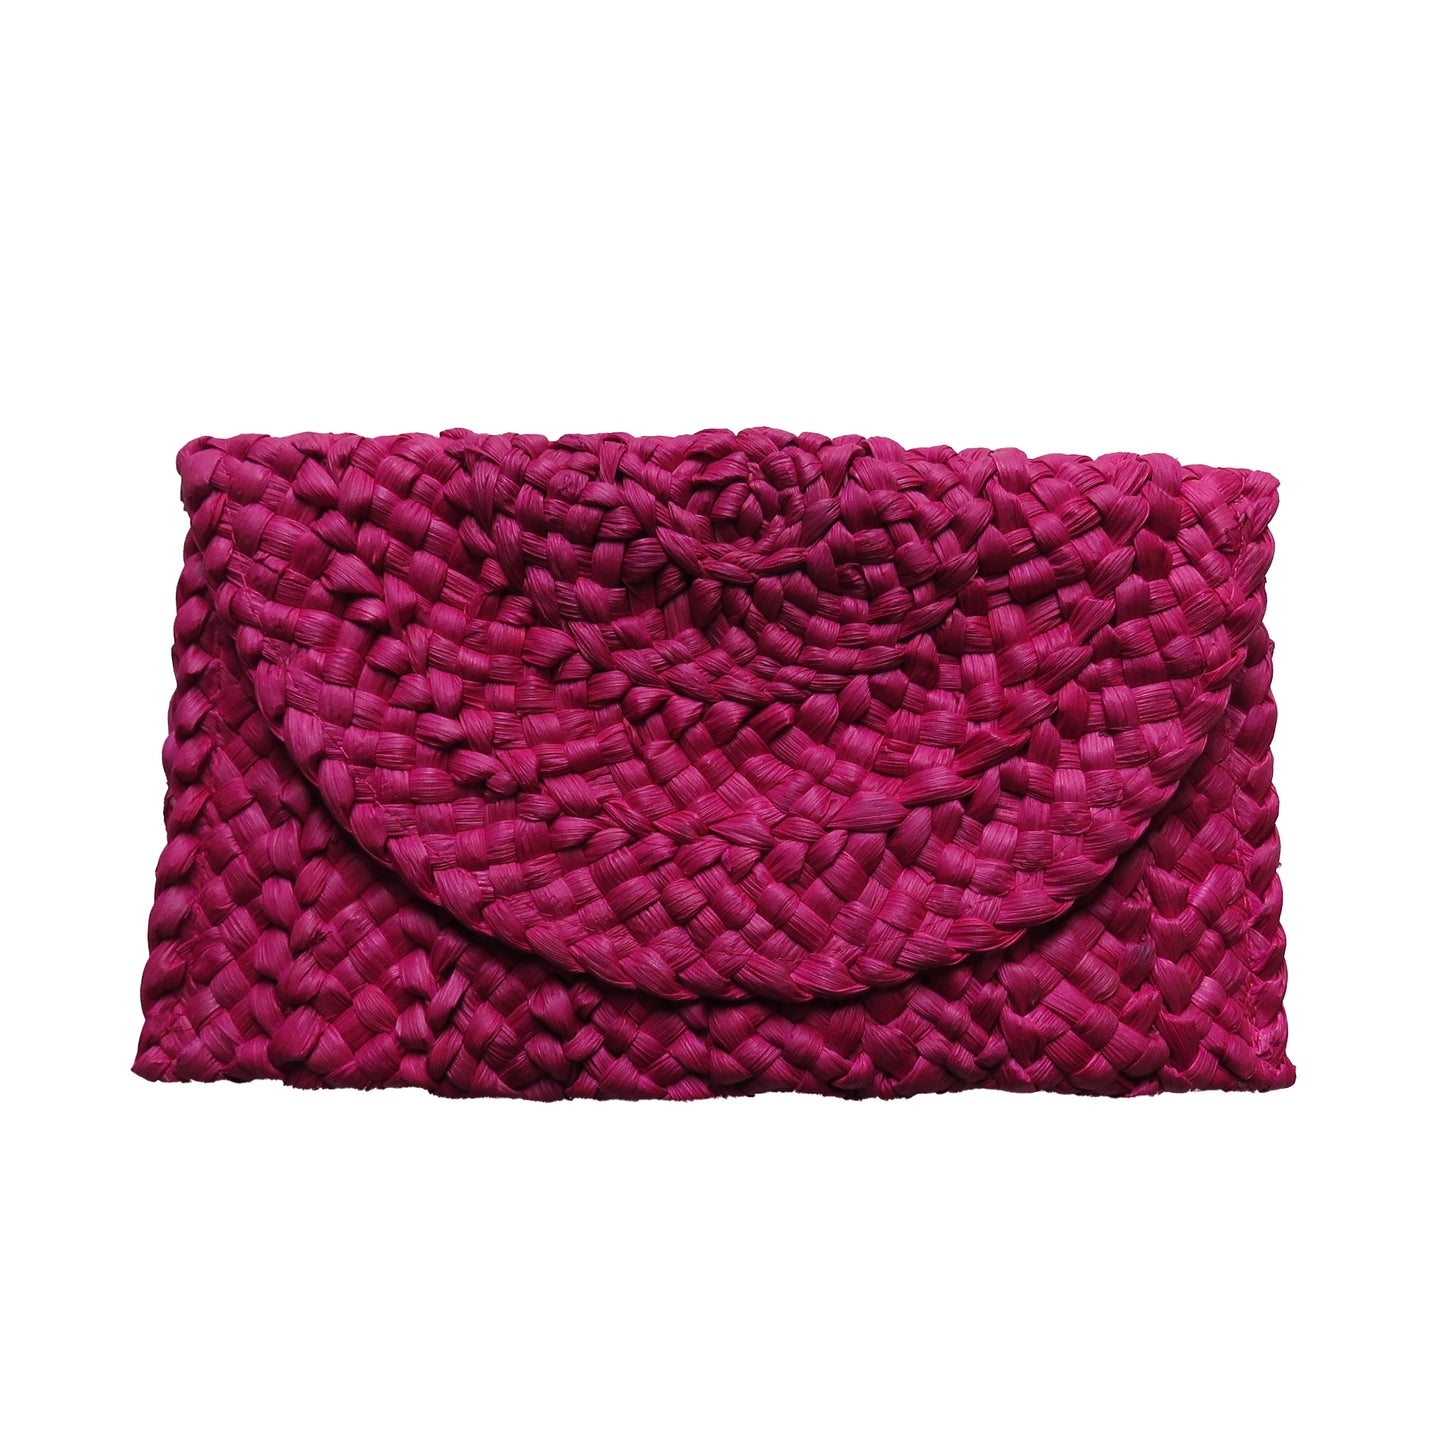 Hadly Pink Woven Clutch